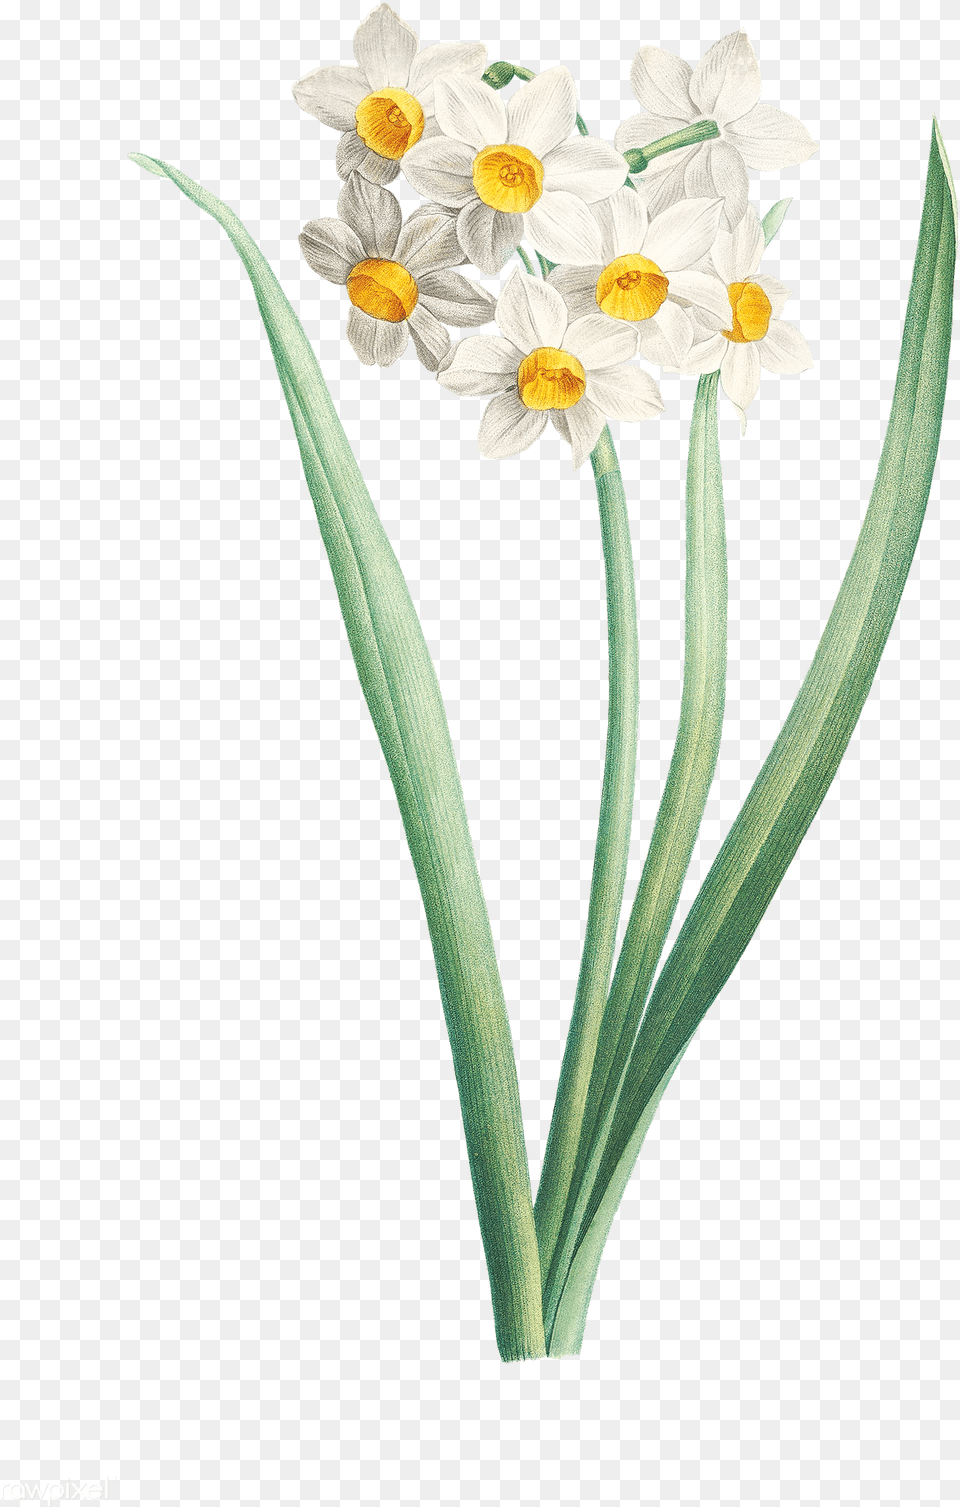 Narcissus Flower Flower, Daffodil, Plant, Daisy Png Image